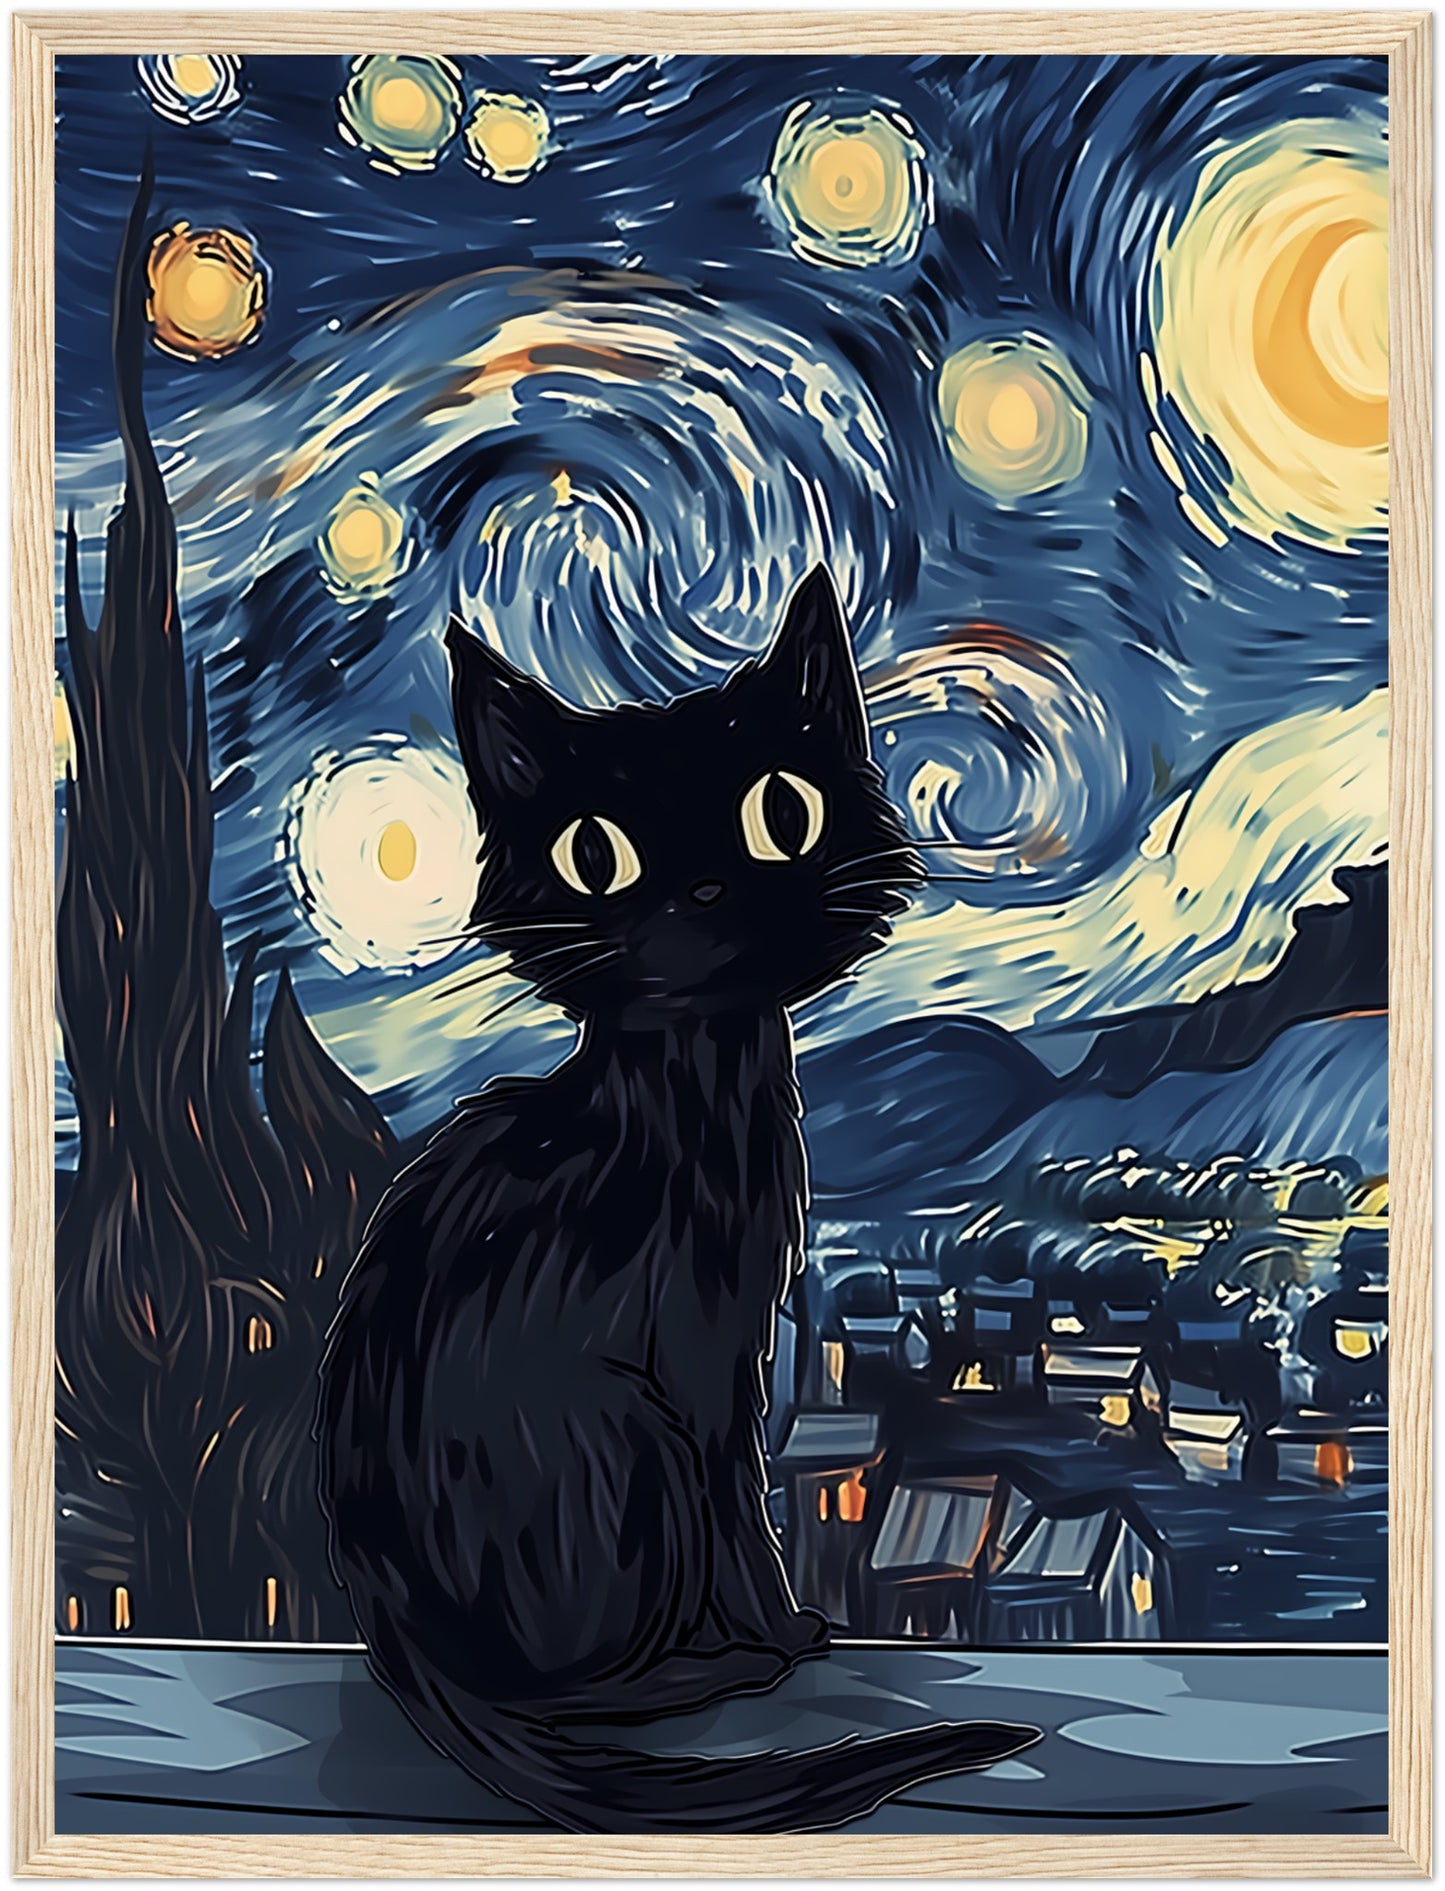 A stylized illustration of a black cat sitting in front of Van Gogh's Starry Night painting.